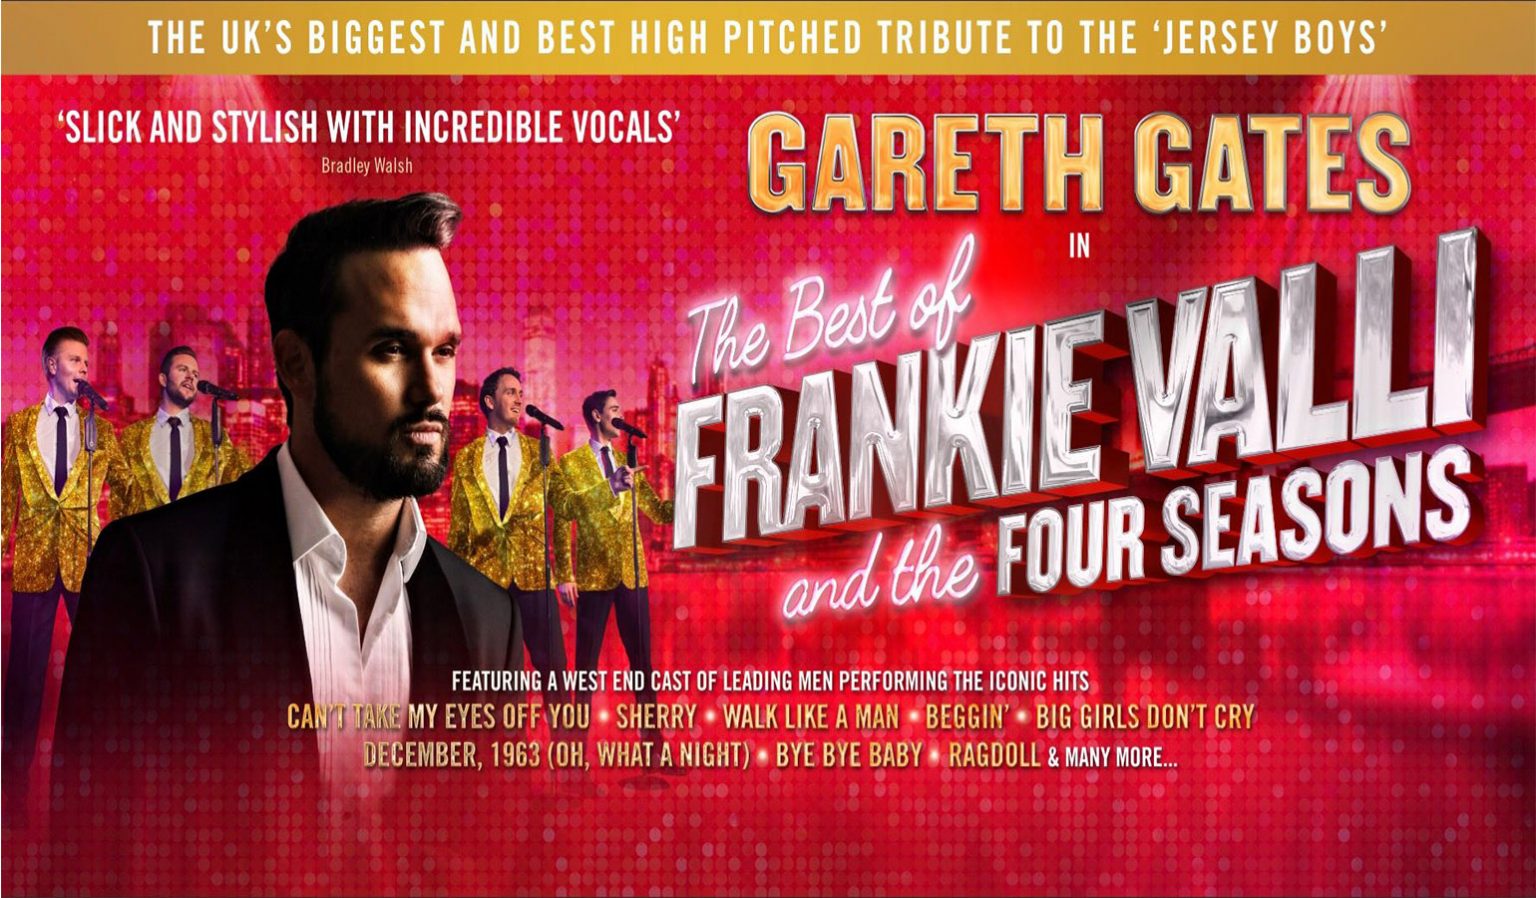 The Best of Frankie Valli and the Four Seasons - Discover Frome